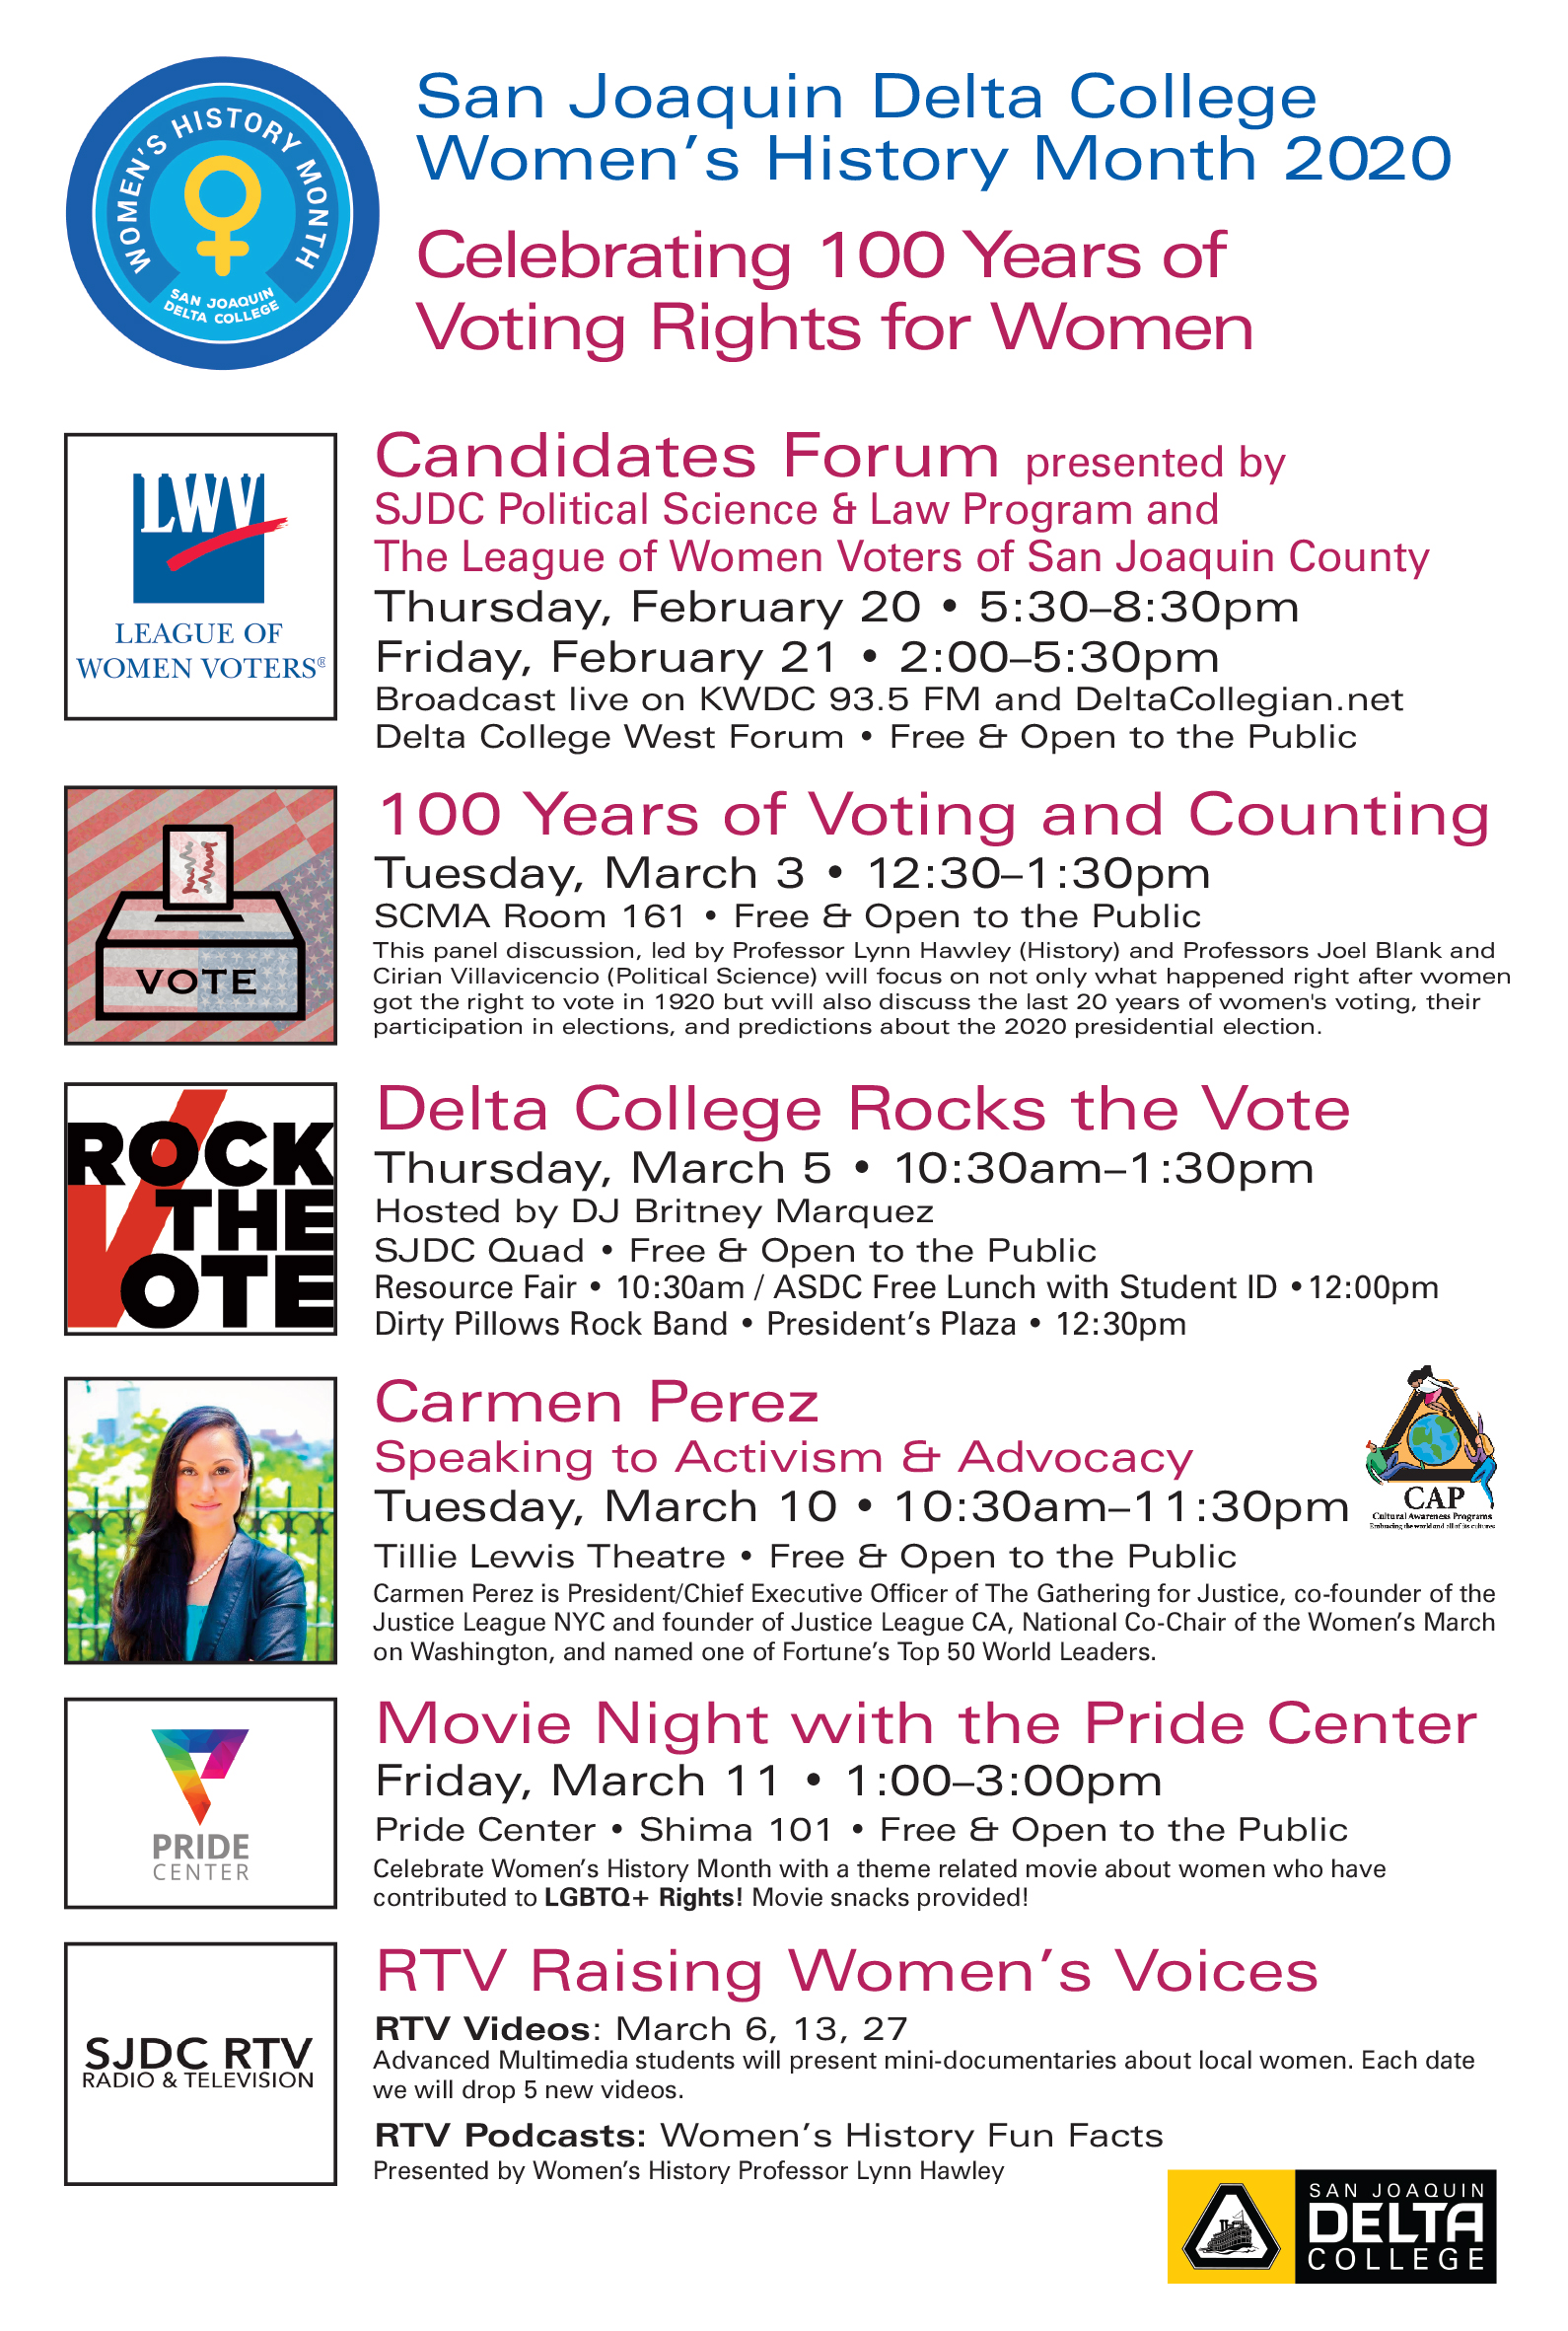 Women's History Month events at Delta College